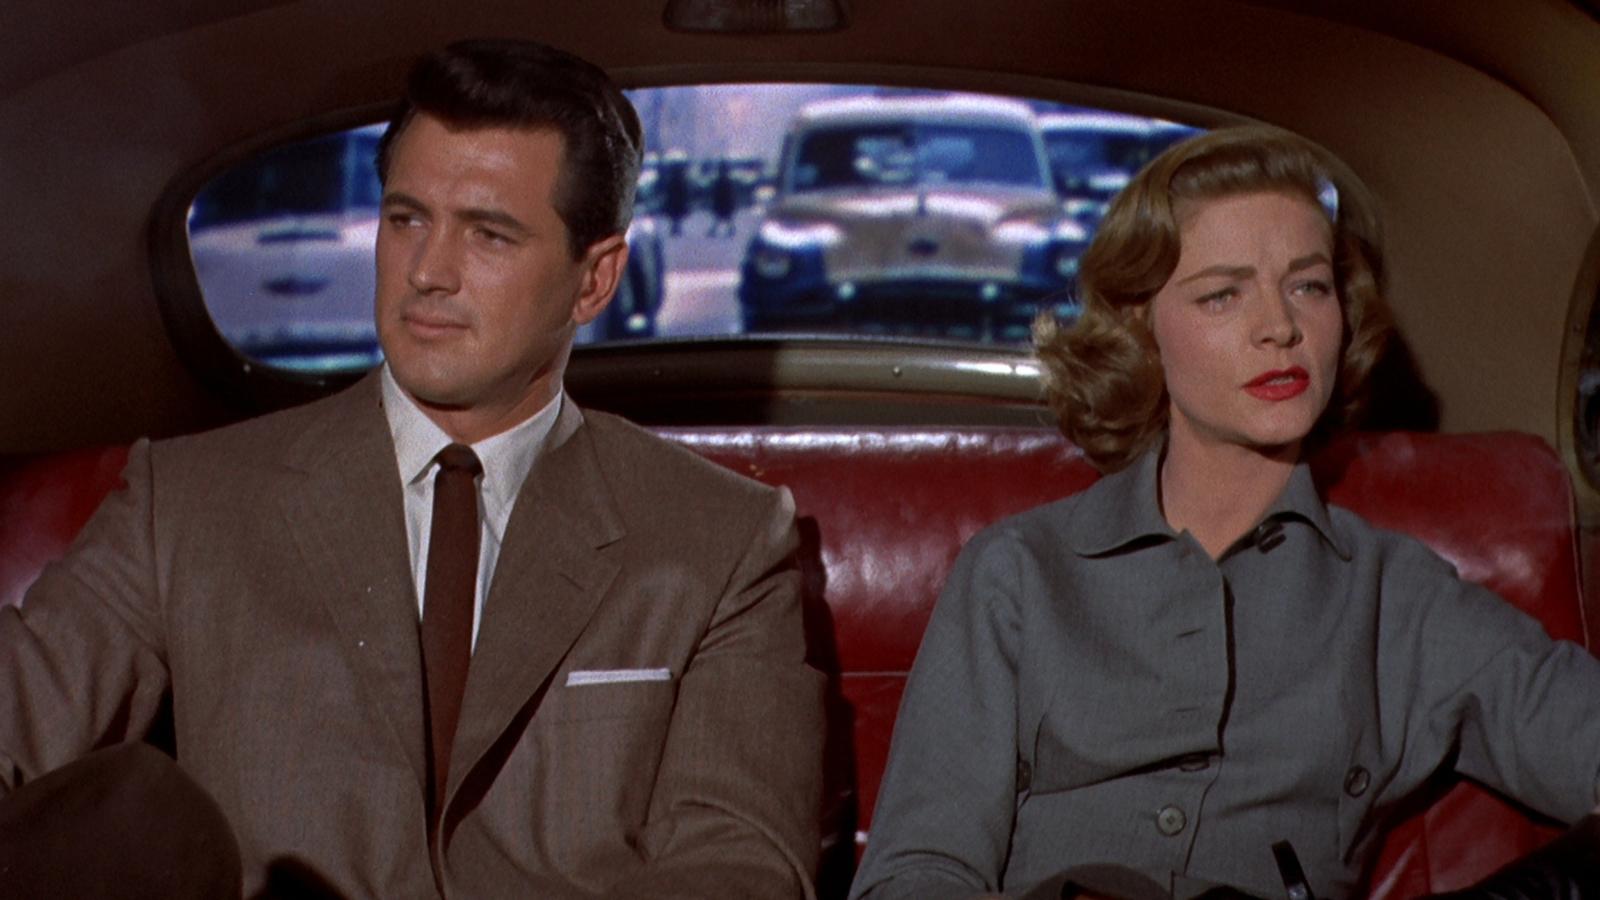 Mitch Wayne (Rock Hudson) and Lucy Moore (Lauren Bacall) still side by side in a car looking at each other. Sirk, Douglas dir. Written On The Wind. 1956